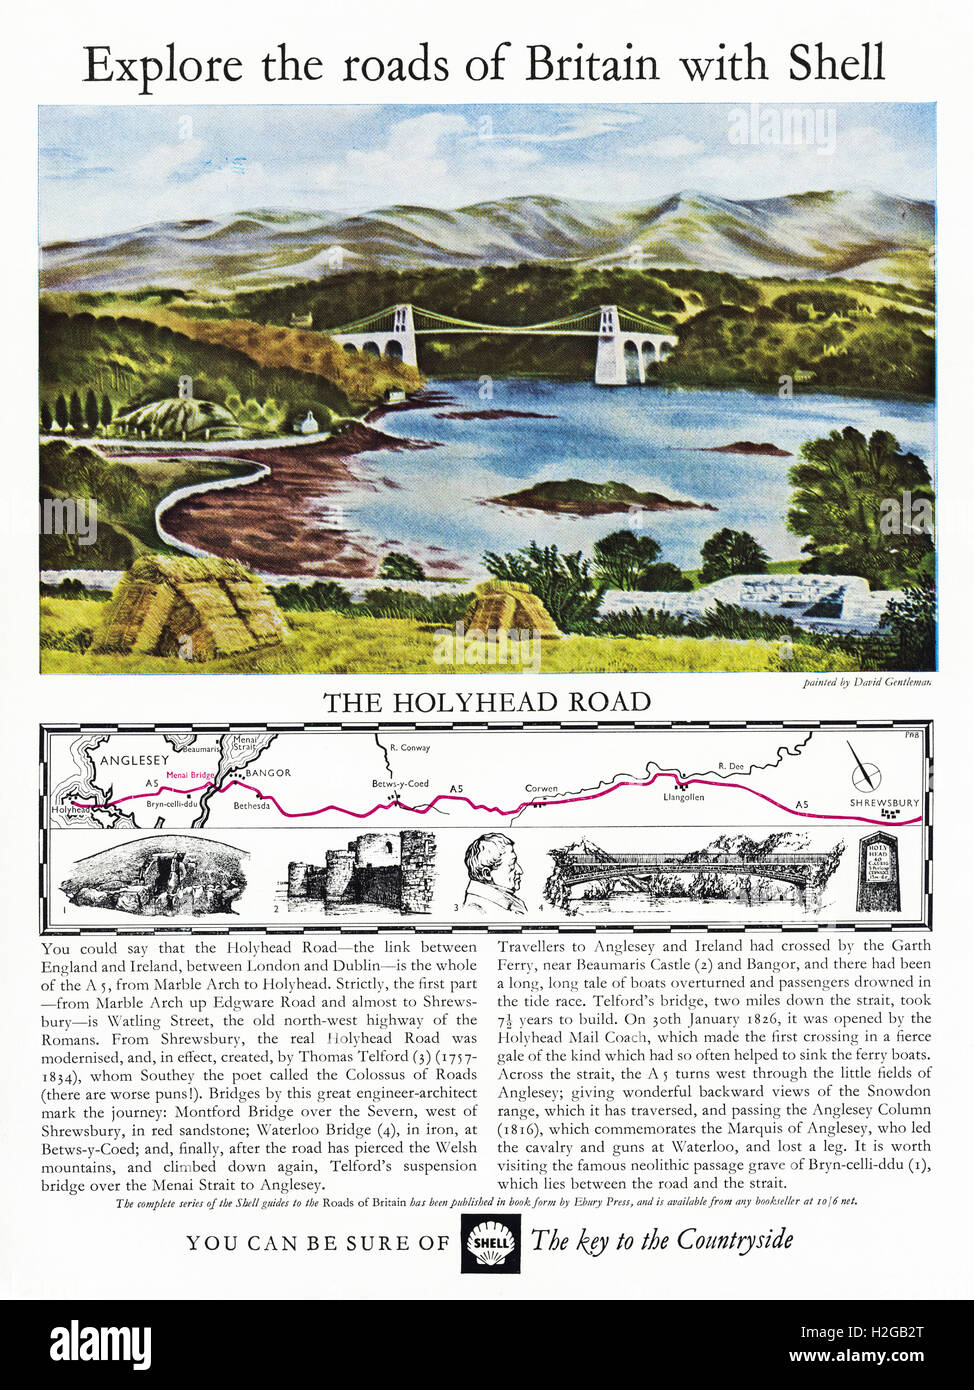 Original old vintage 1960s magazine advert dated 1964. Advertisement advertising explore the countryside with Shell Stock Photo